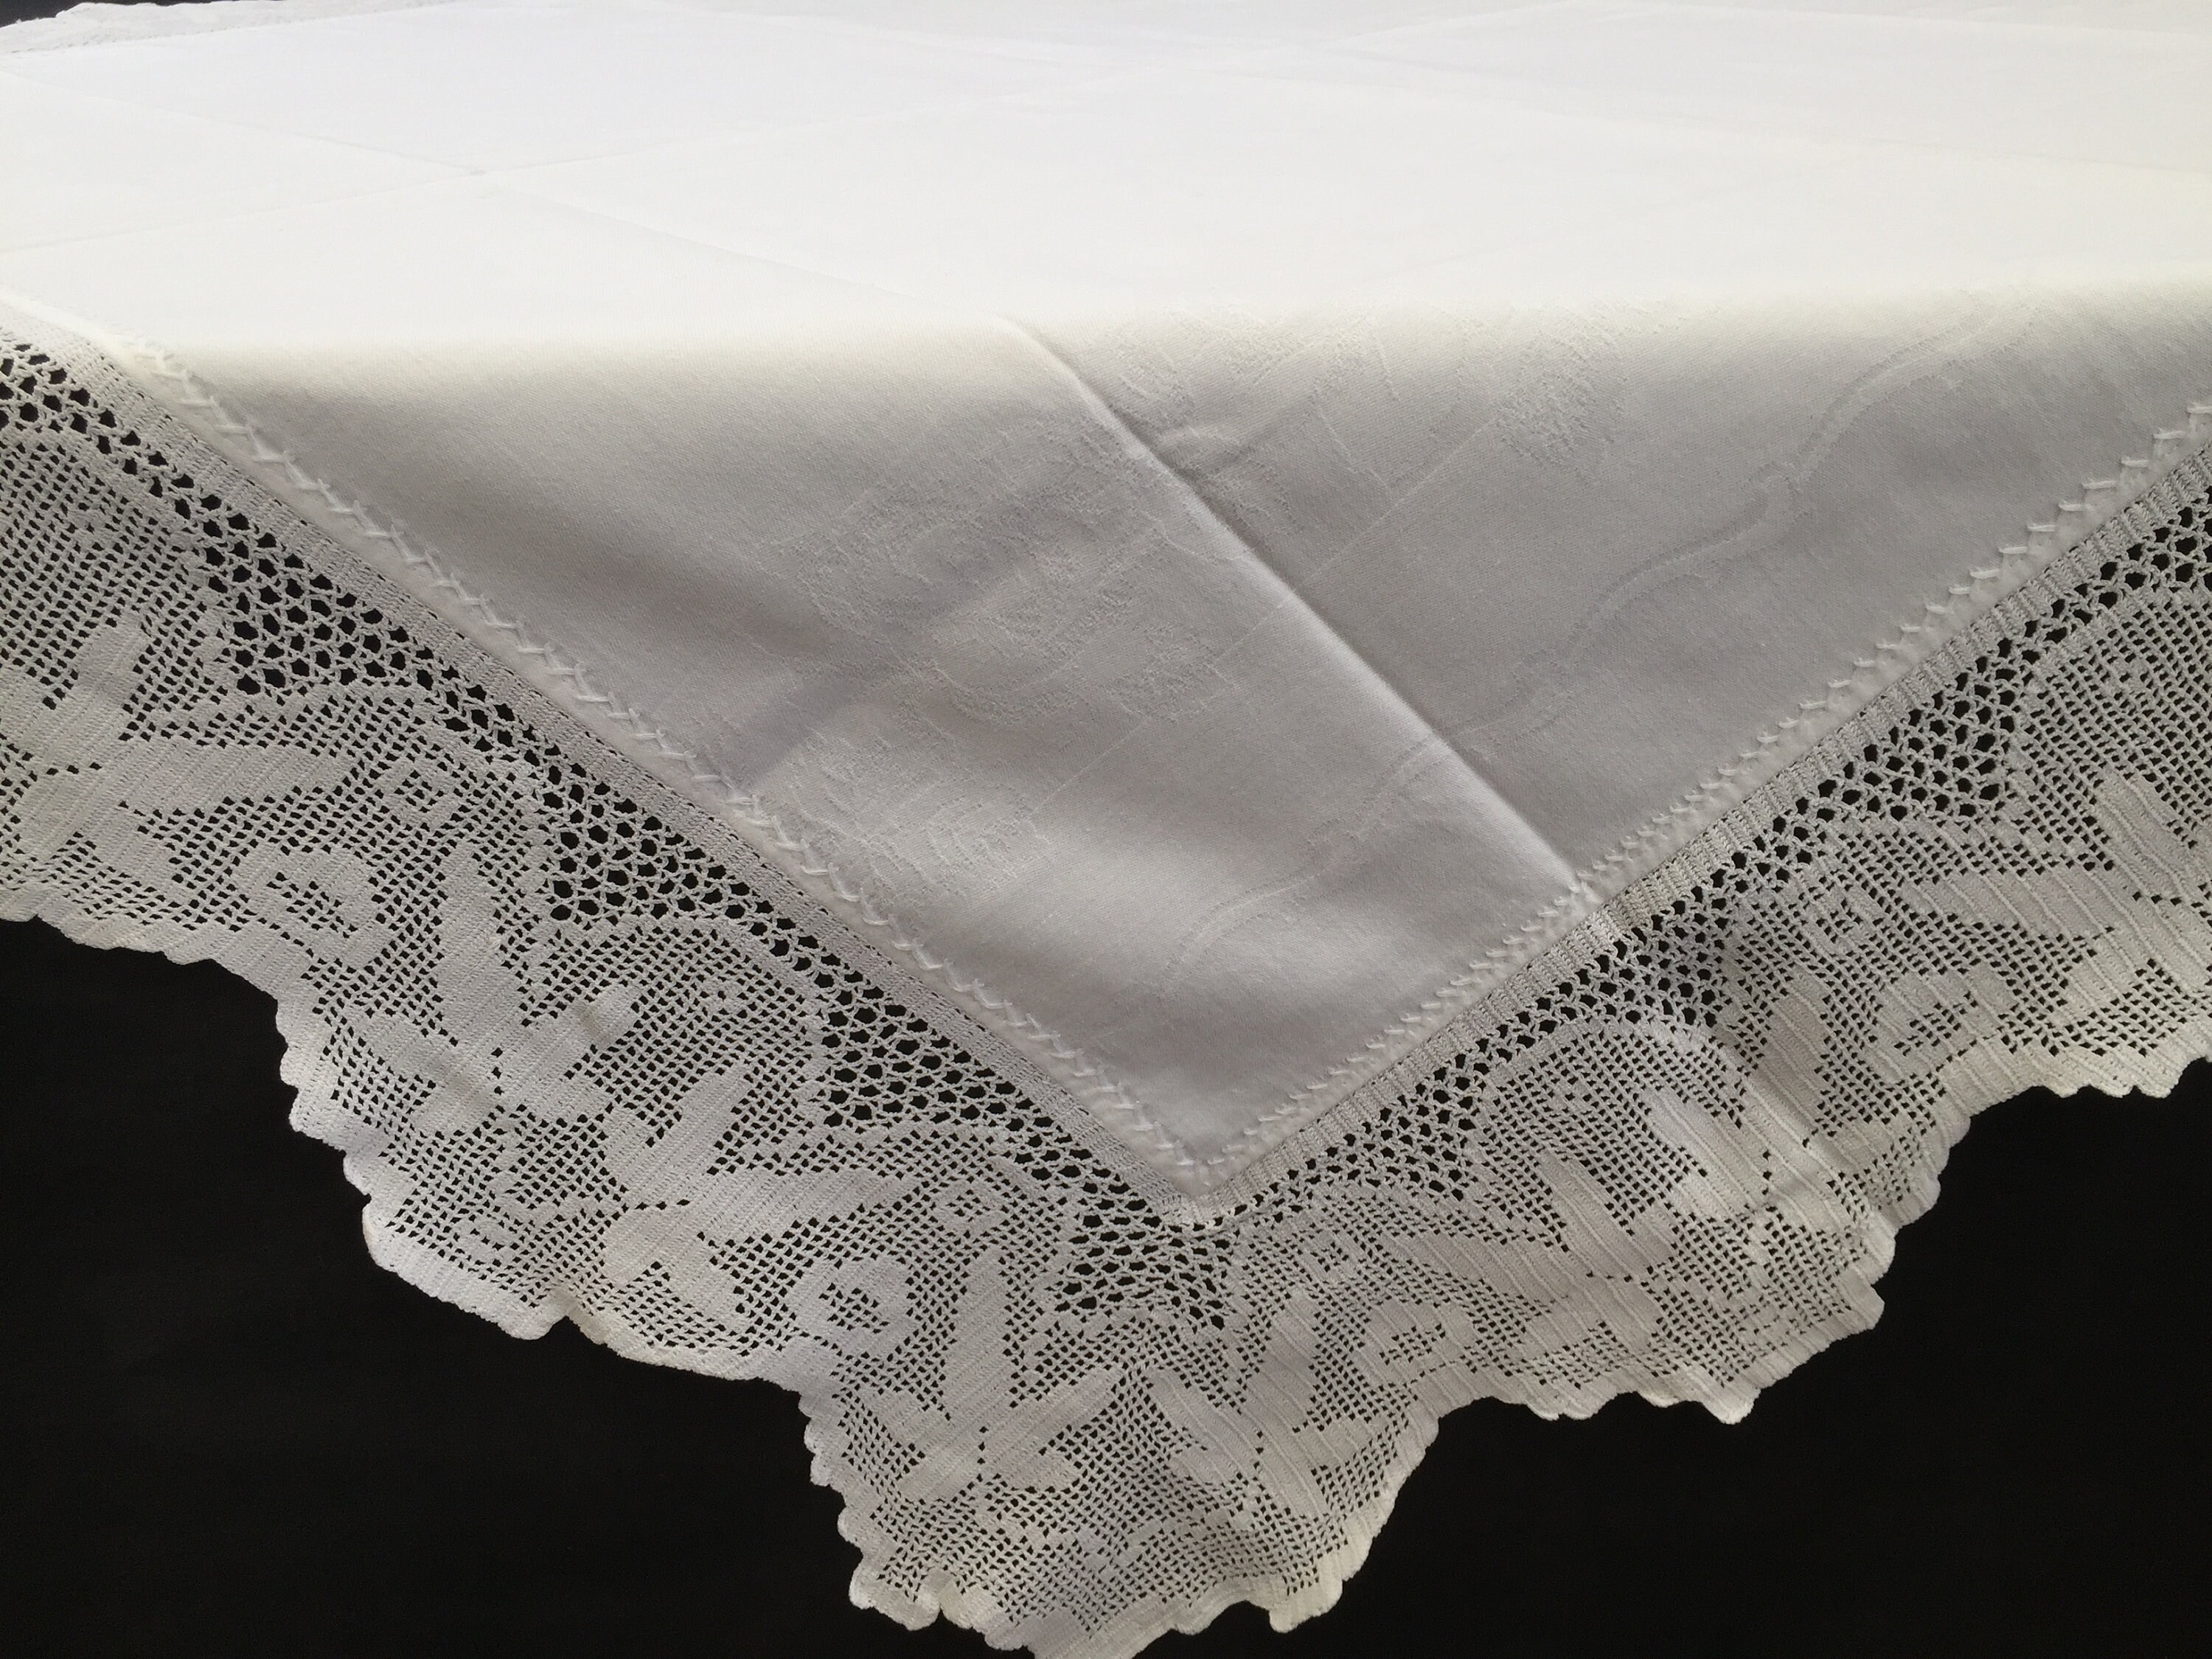 Vintage Irish Lace and Damask Linen Tablecloth with Maple Leaf | Etsy